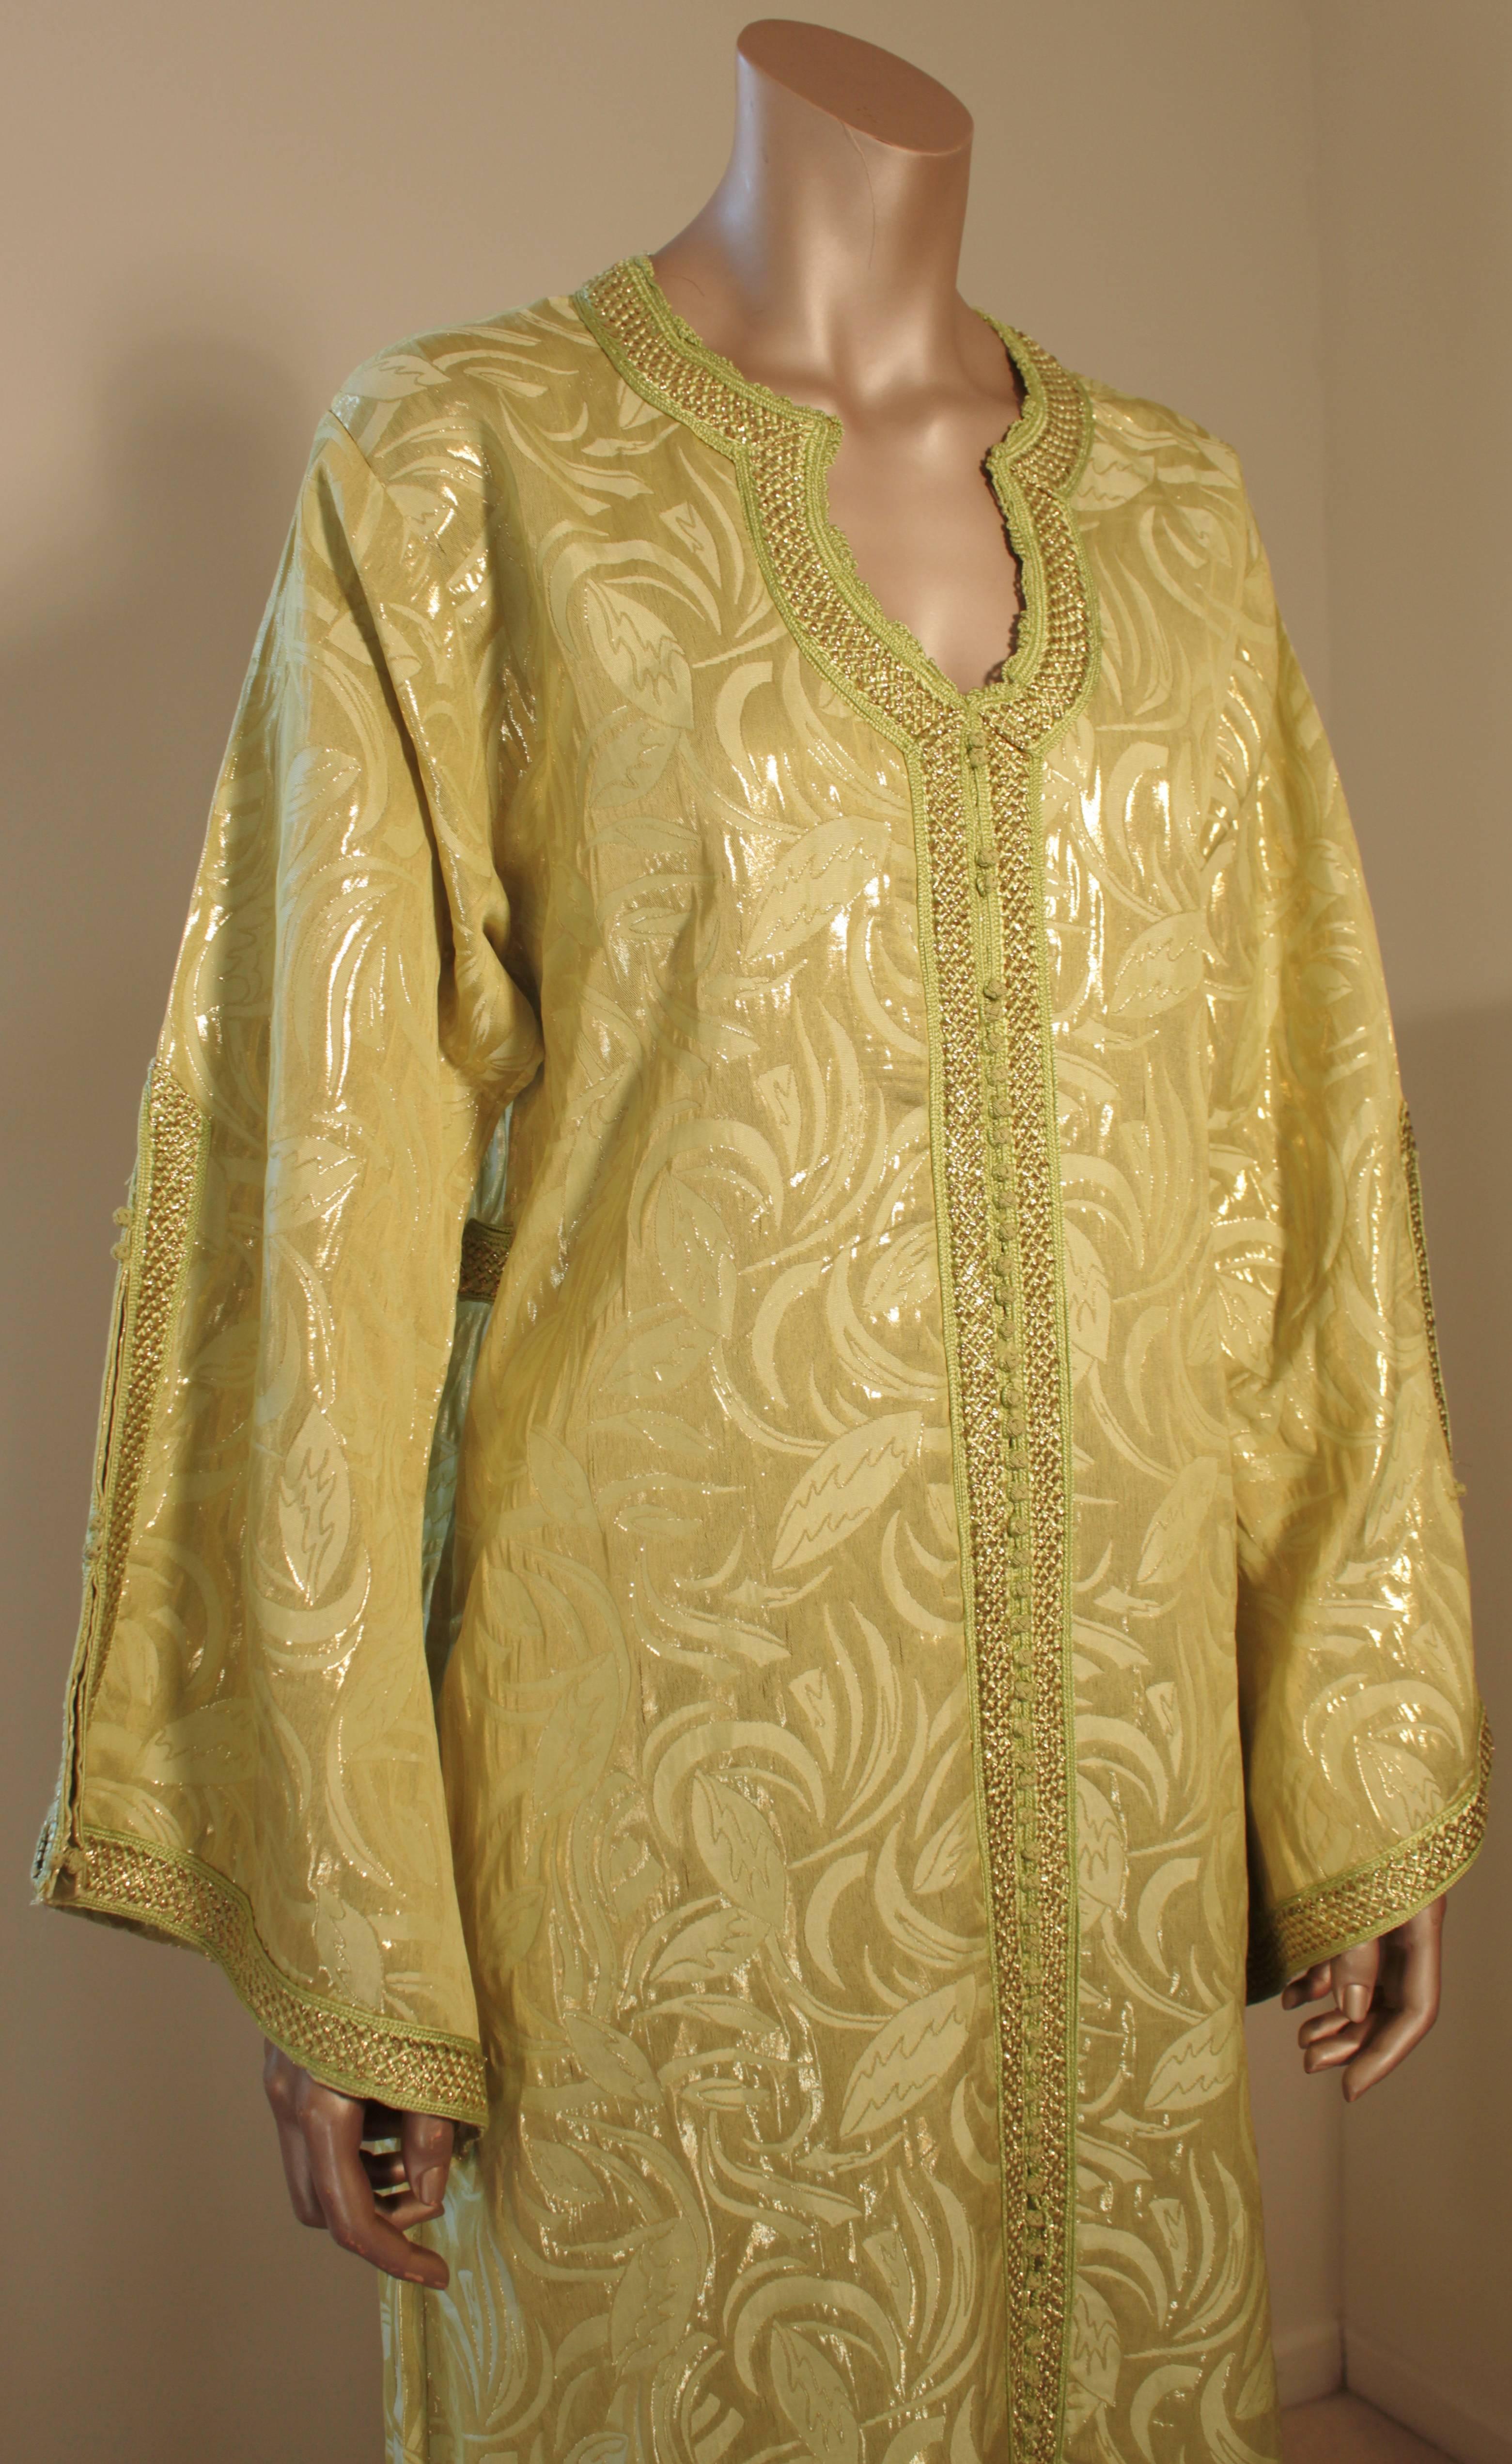 Moroccan vintage exotic metallic brocade caftan gown, circa 1970s.
The luxurious Moorish kaftan is designed with brilliant gold and green metallic brocade and green embroidered.
The front of the elegant caftan gown is embellished at the front with